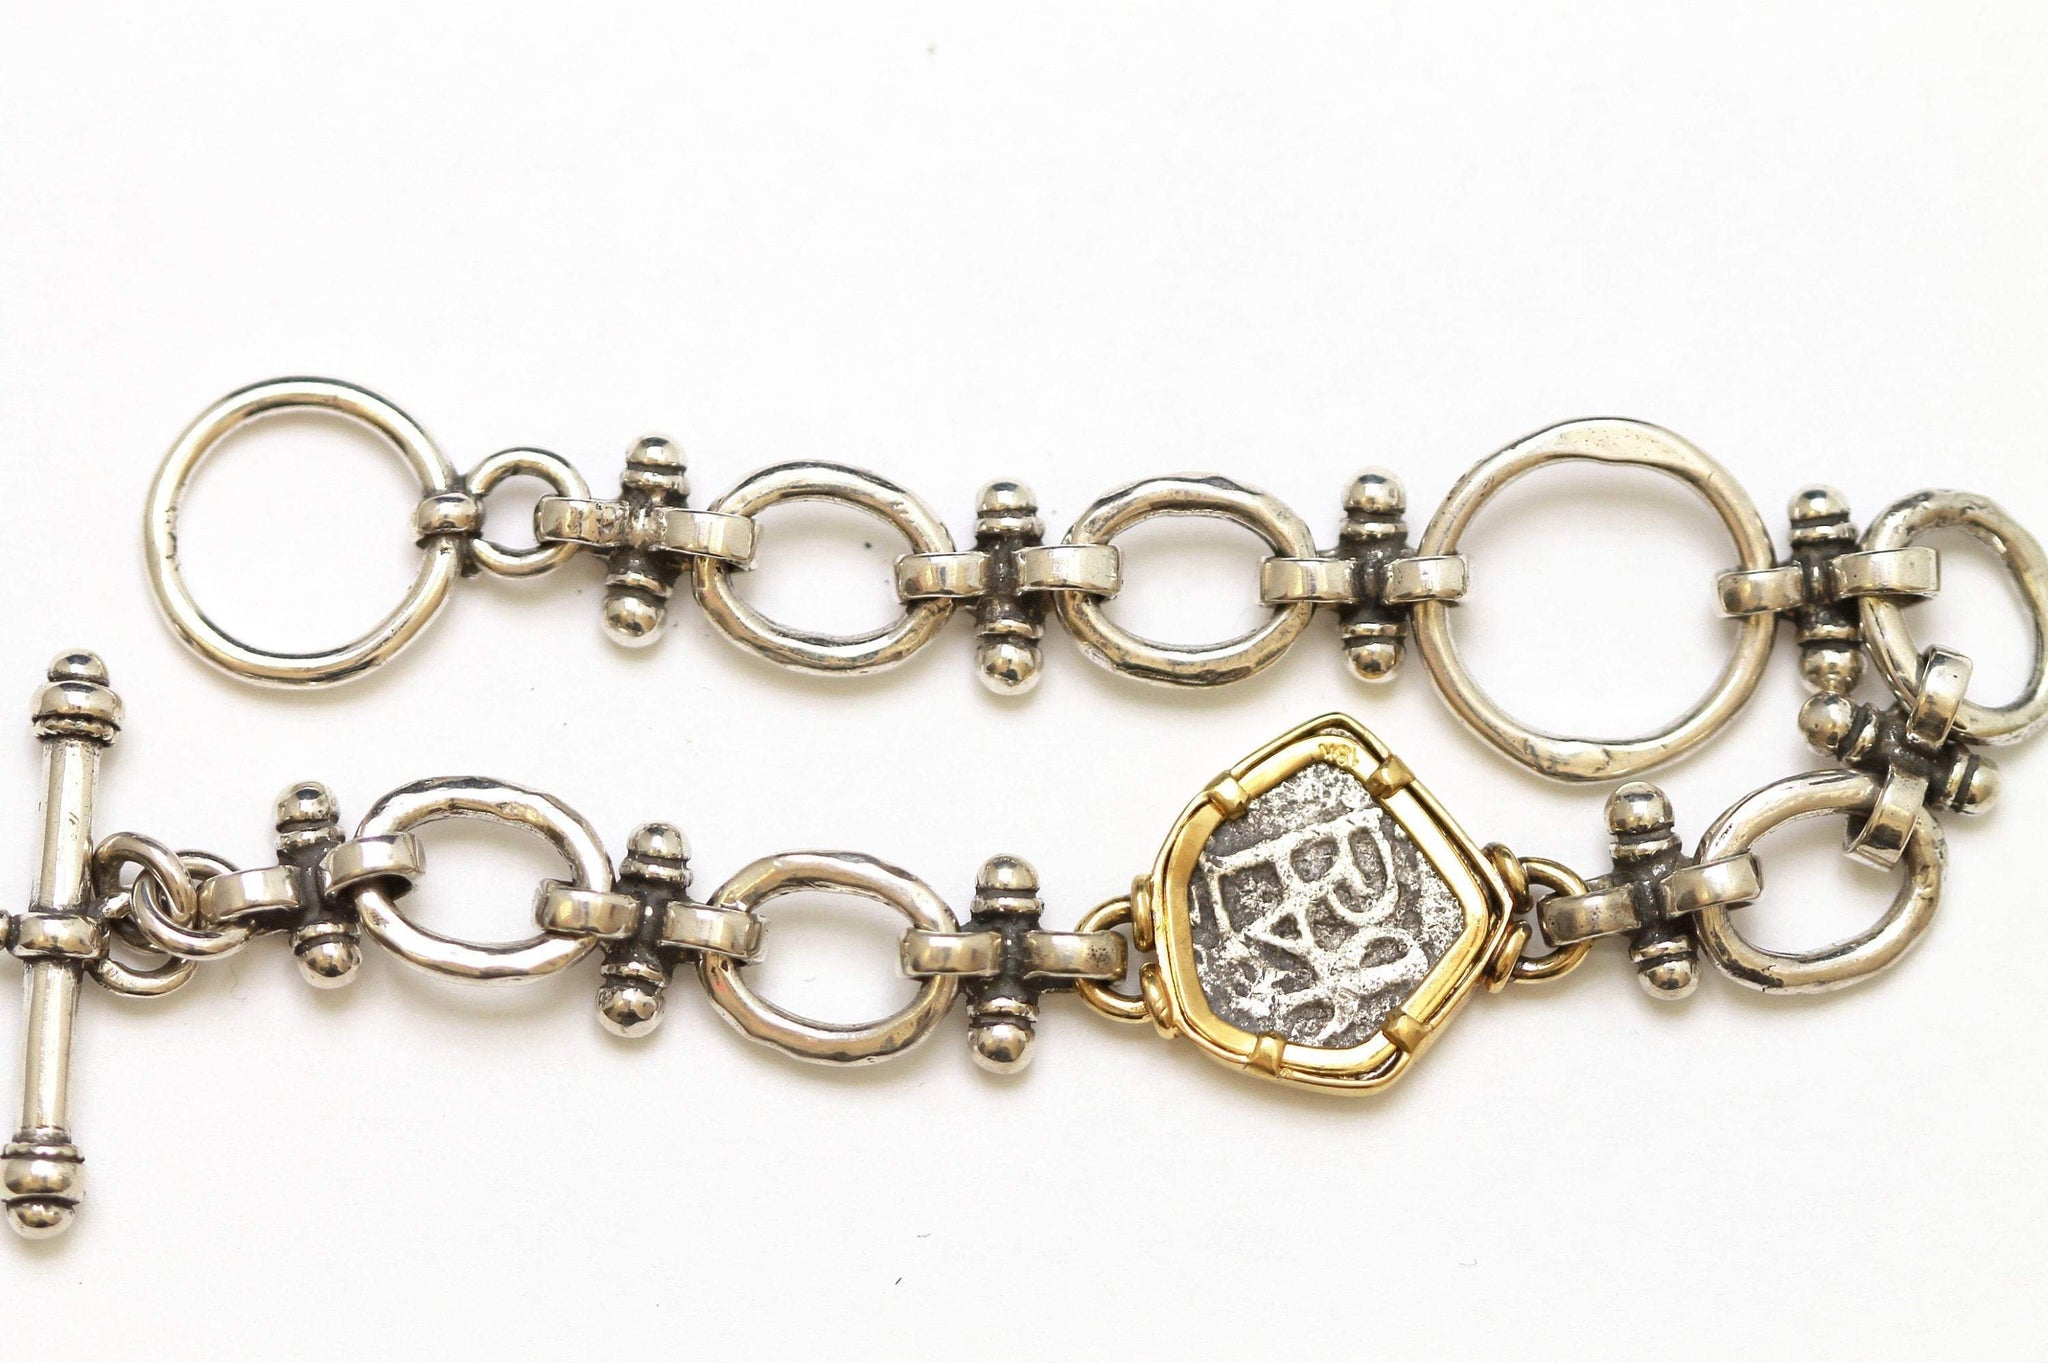 Spanish 1/2 Real, 18K Gold and Silver Link Bracelet, Ancient Coin, ID13398